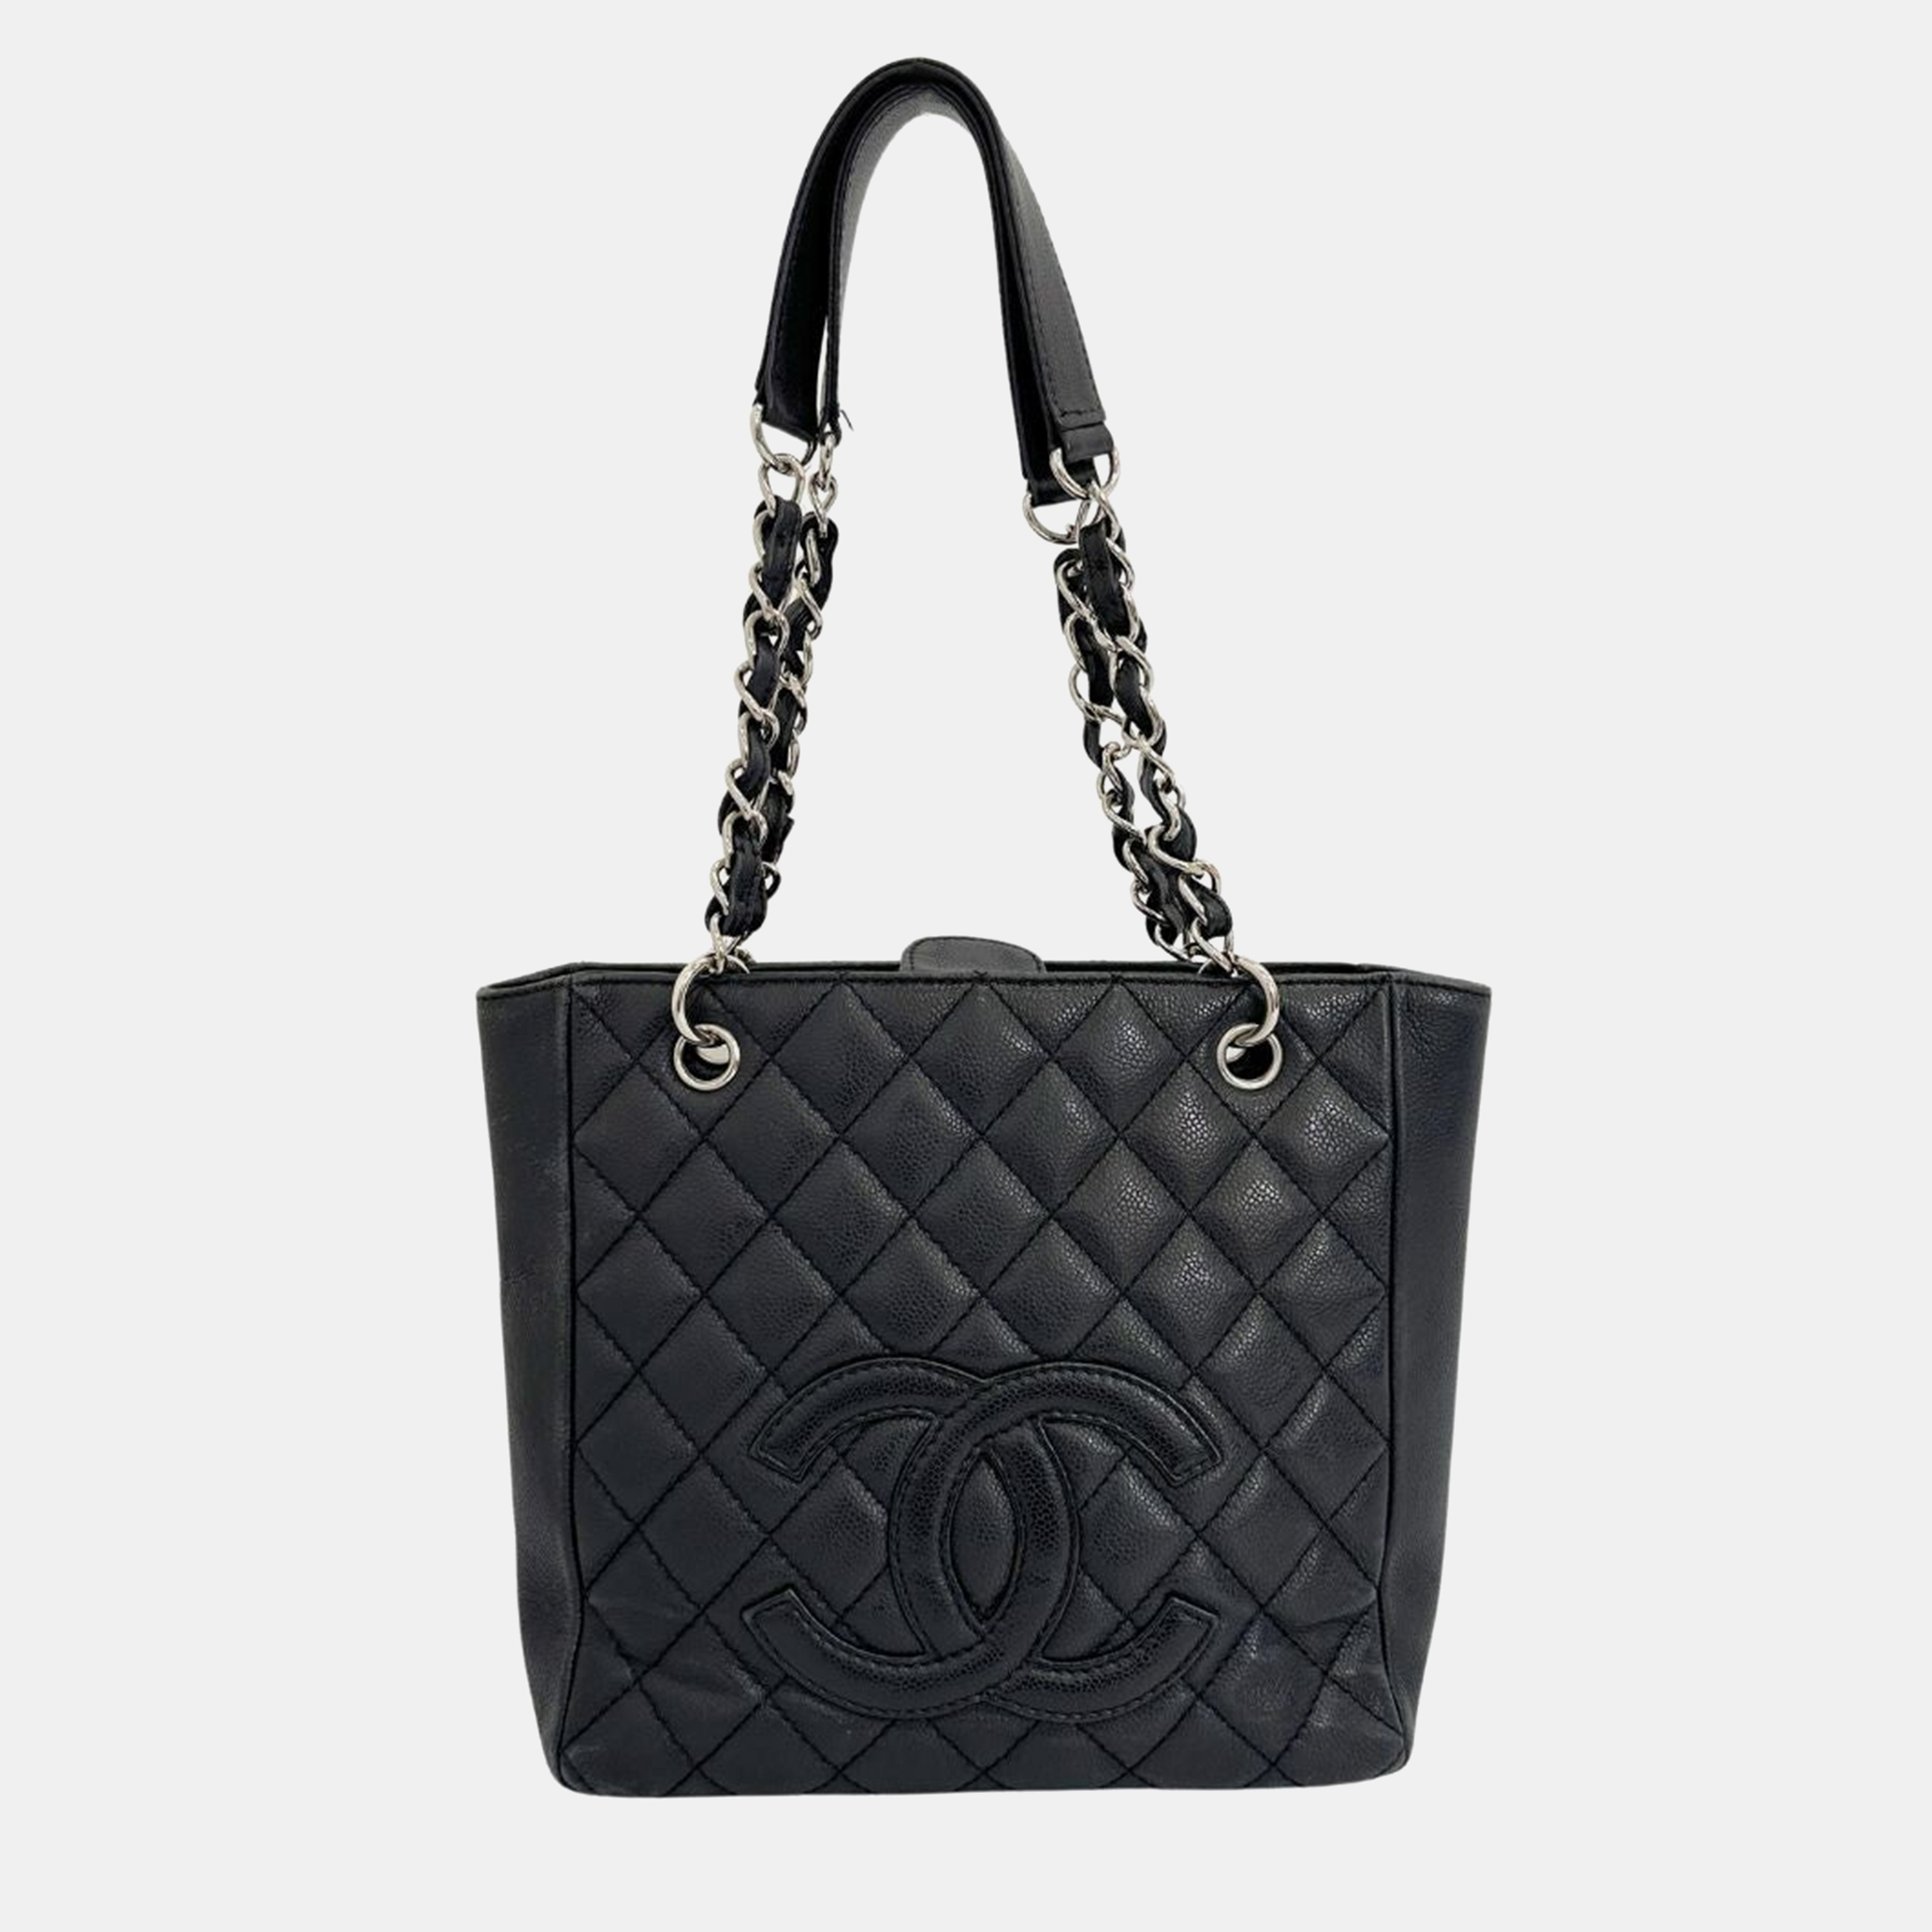 Chanel balck quilted leather petite shopping tote